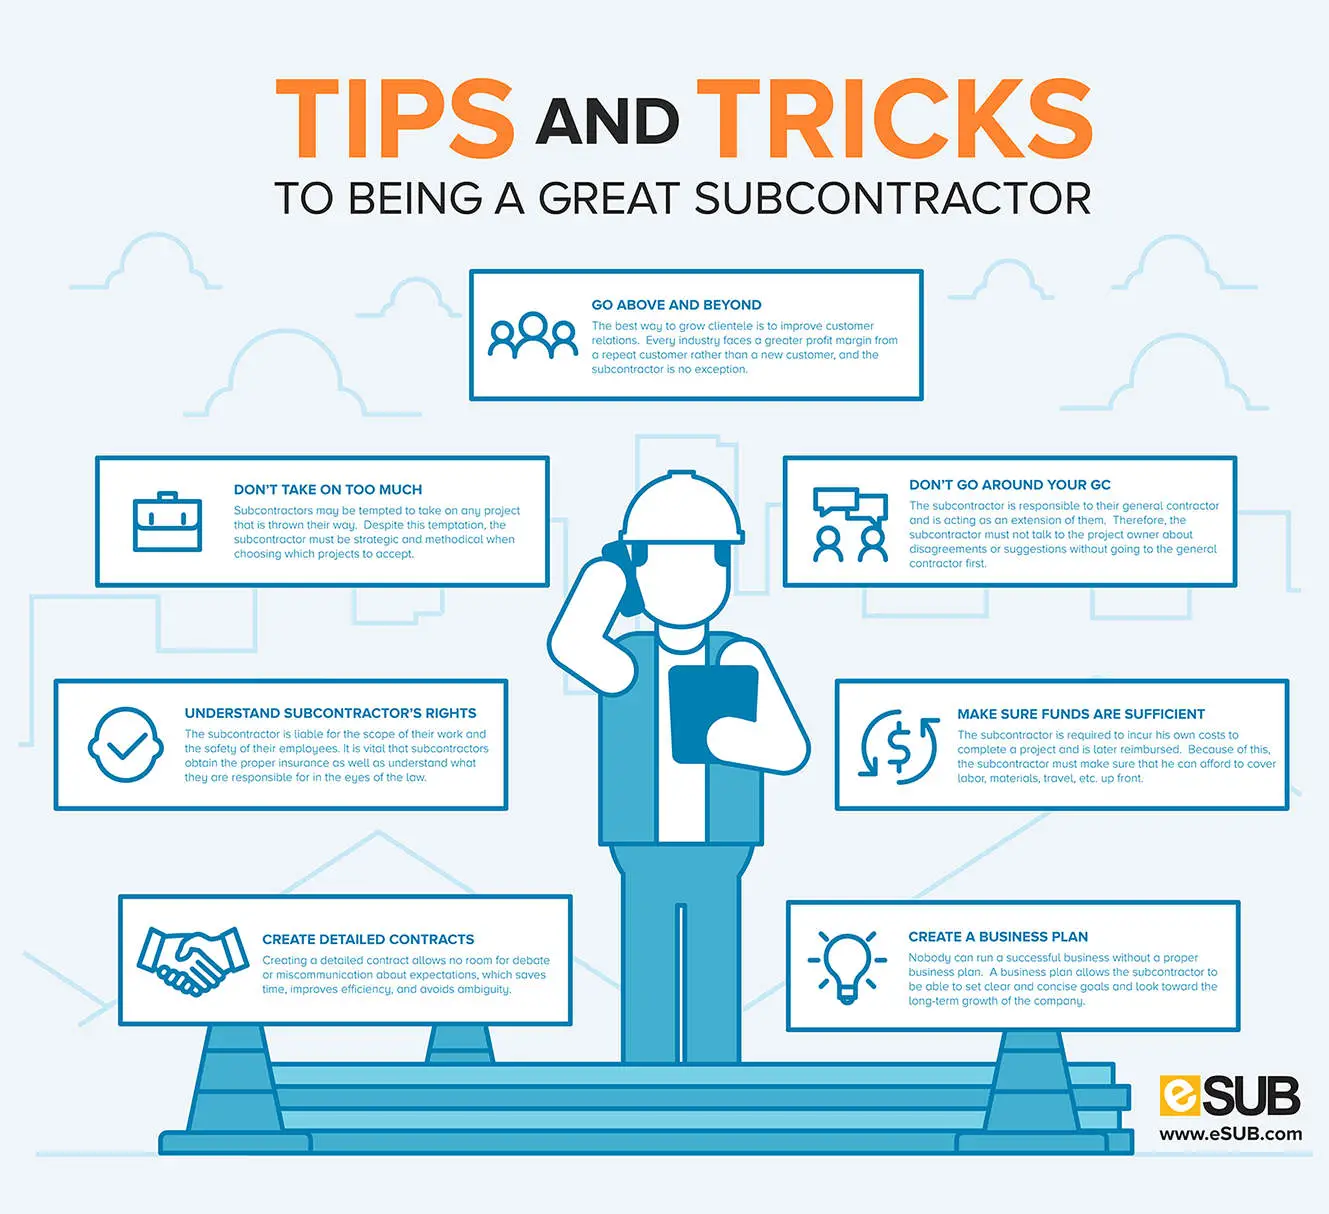 Tips and Tricks to Being a Great Subcontractor